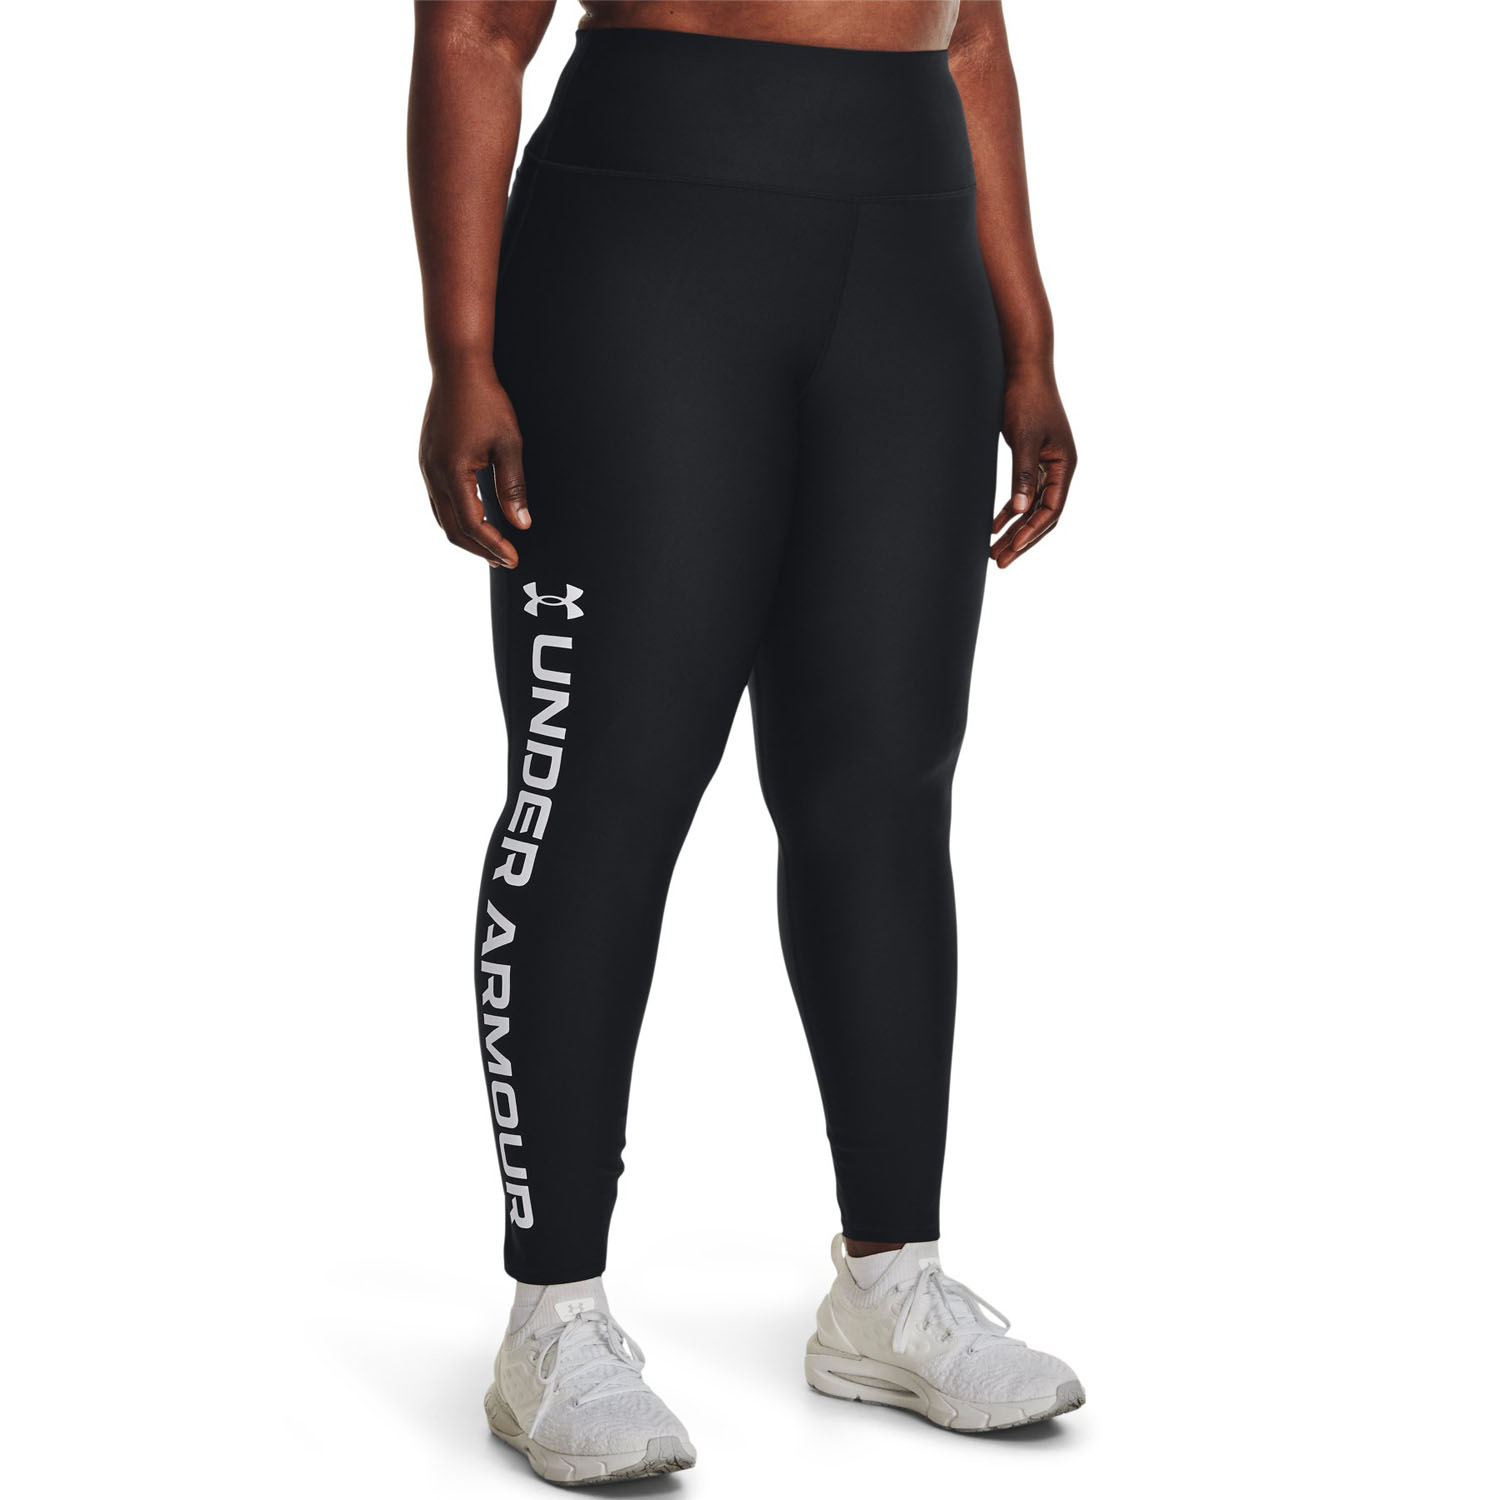 Under Armour - Womens New Armour Branded Leggings